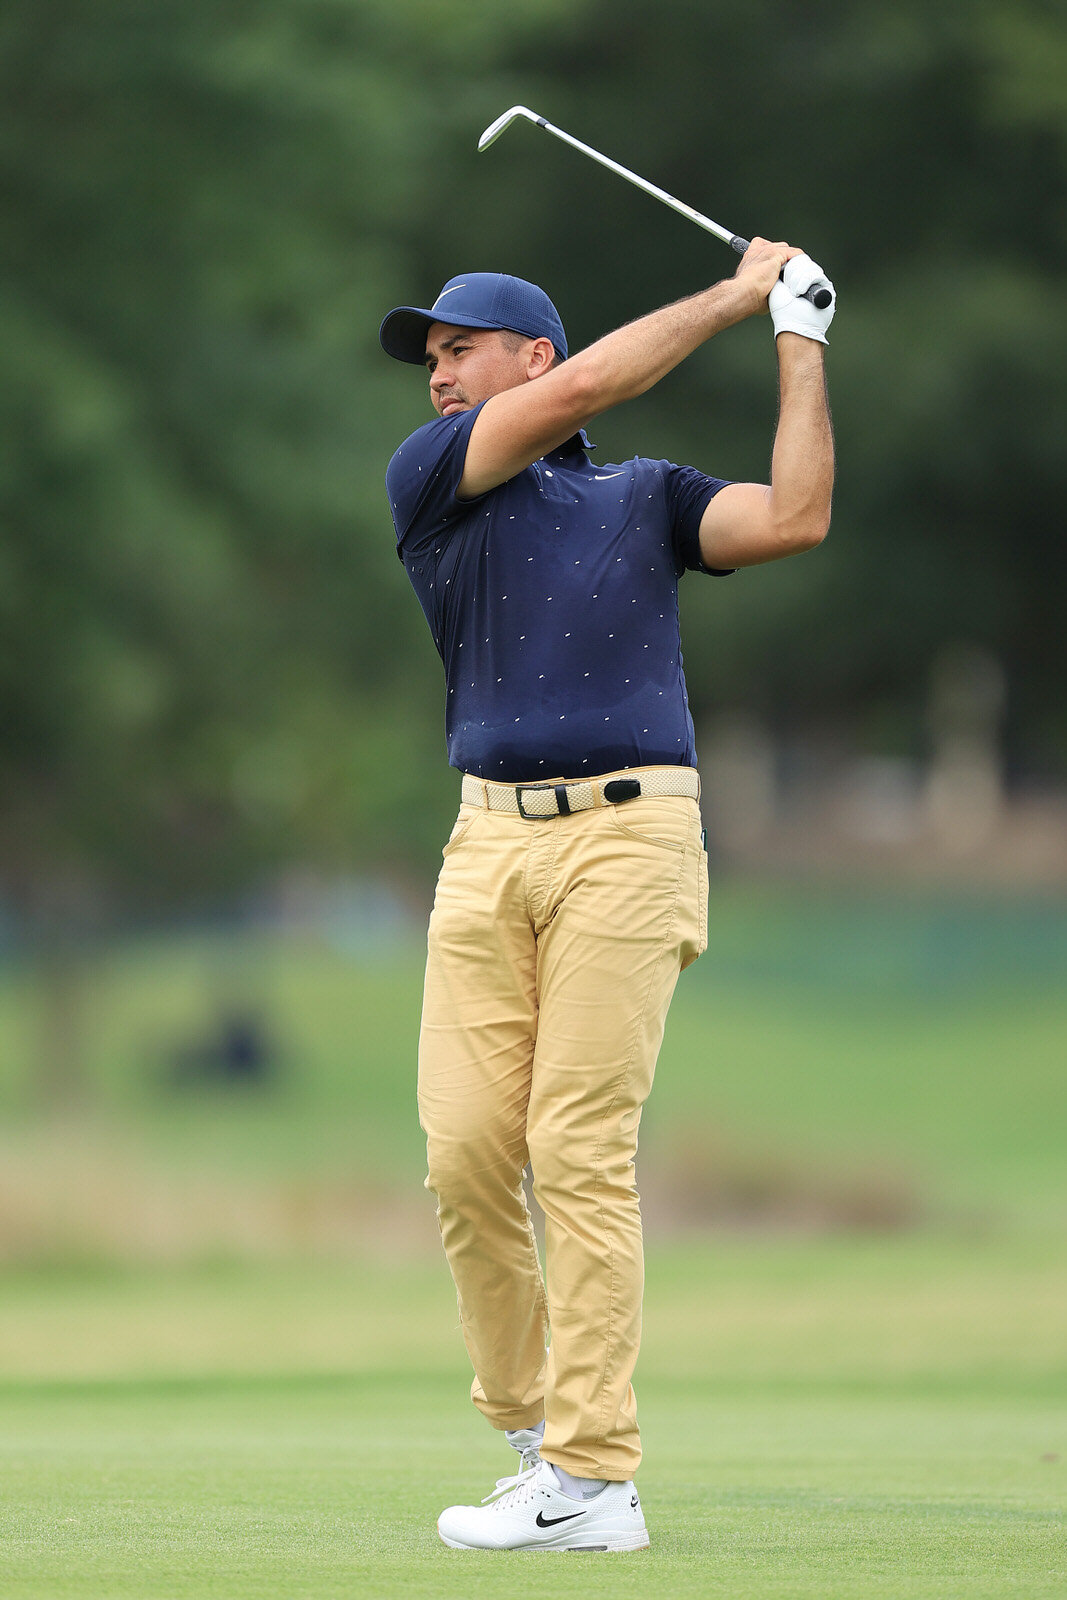  MEMPHIS, TENNESSEE - JULY 31:  Jason Day of Australia plays a shot on the 13th hole during the second round of the World Golf Championship-FedEx St Jude Invitational at TPC Southwind on July 31, 2020 in Memphis, Tennessee. (Photo by Andy Lyons/Getty